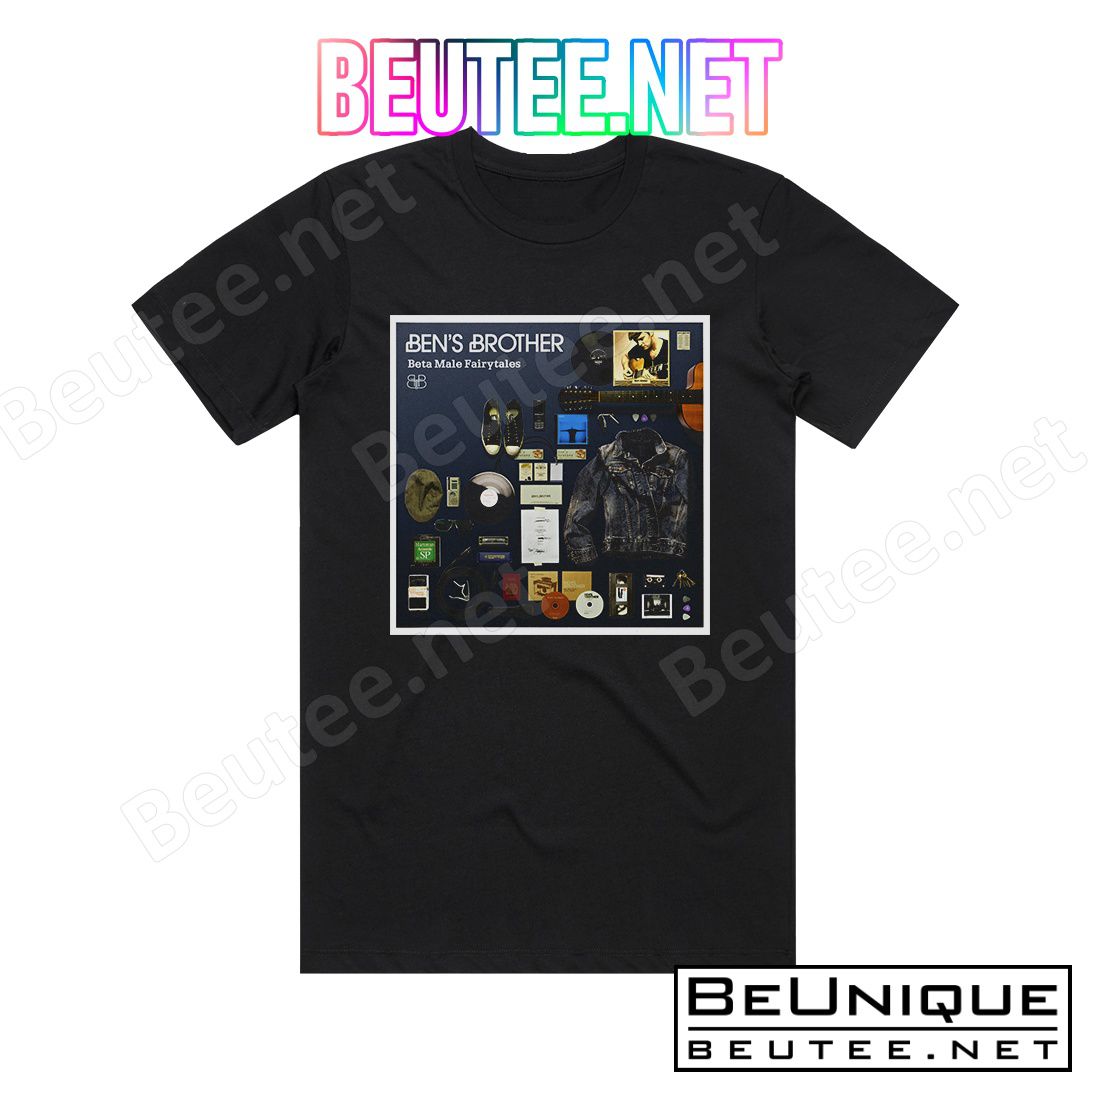 Ben's Brother Beta Male Fairytales Album Cover T-Shirt